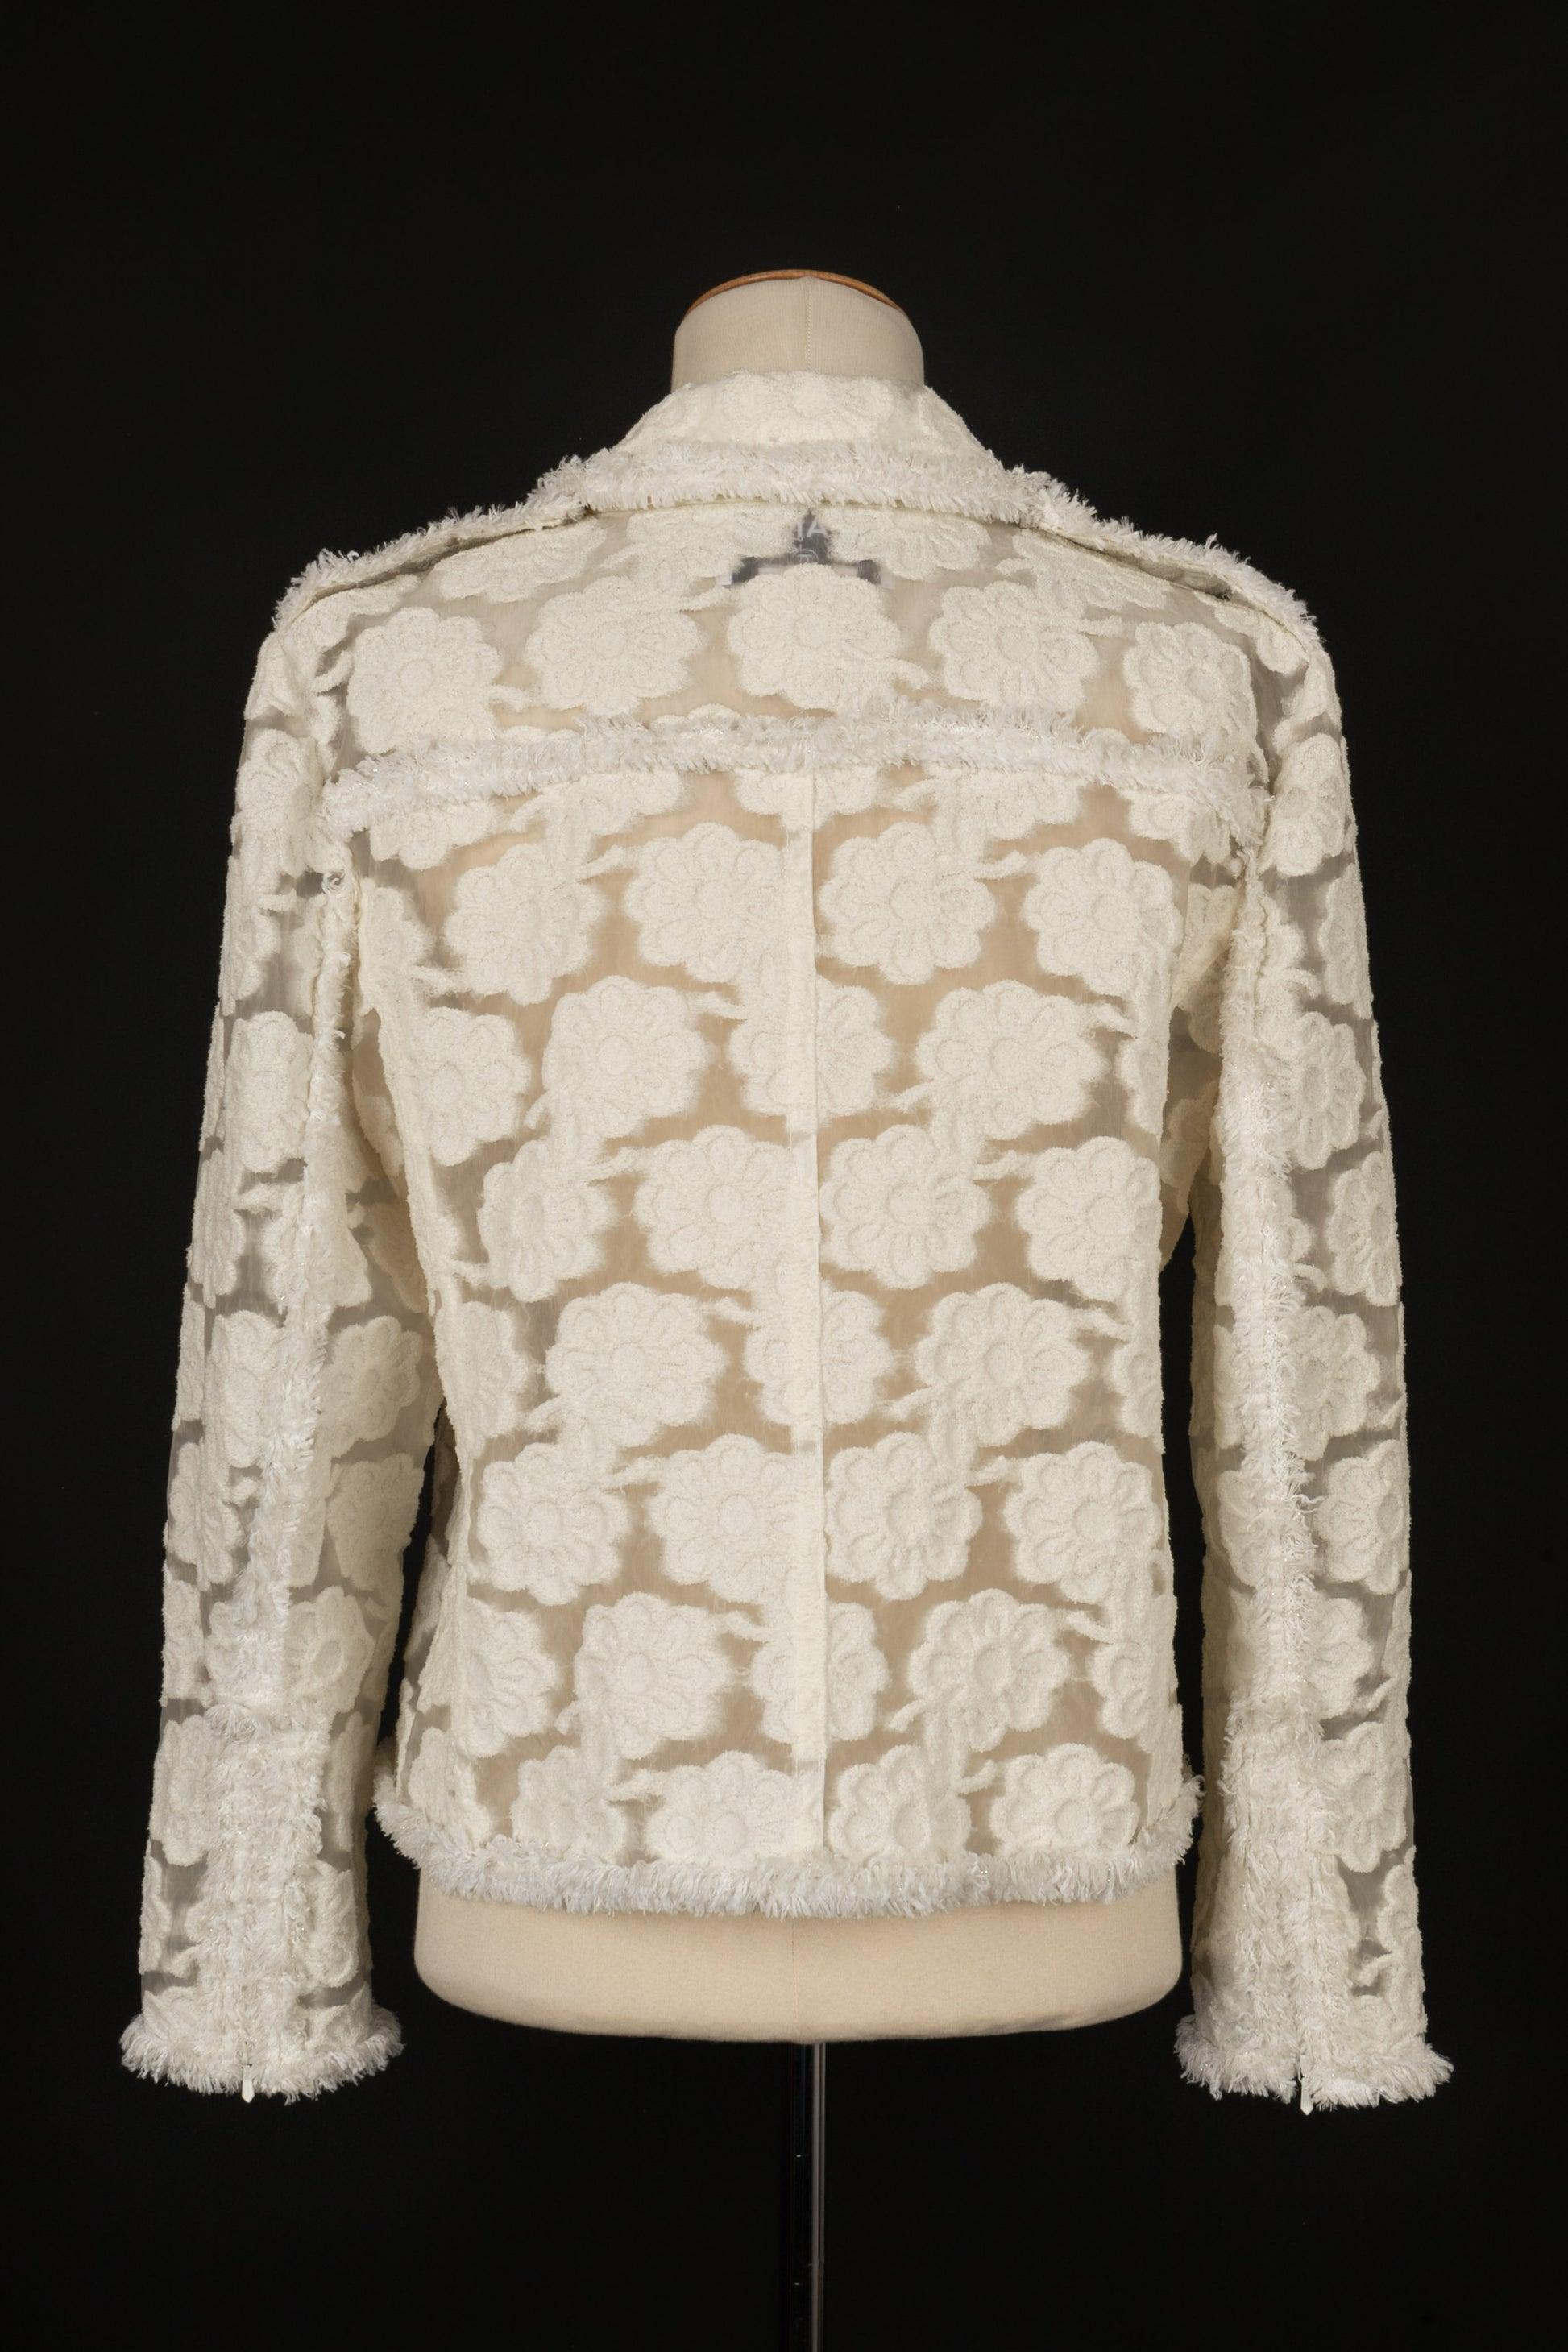 Chanel Blended Cotton Openwork Jacket Representing White Flowers, 2009 In Excellent Condition For Sale In SAINT-OUEN-SUR-SEINE, FR